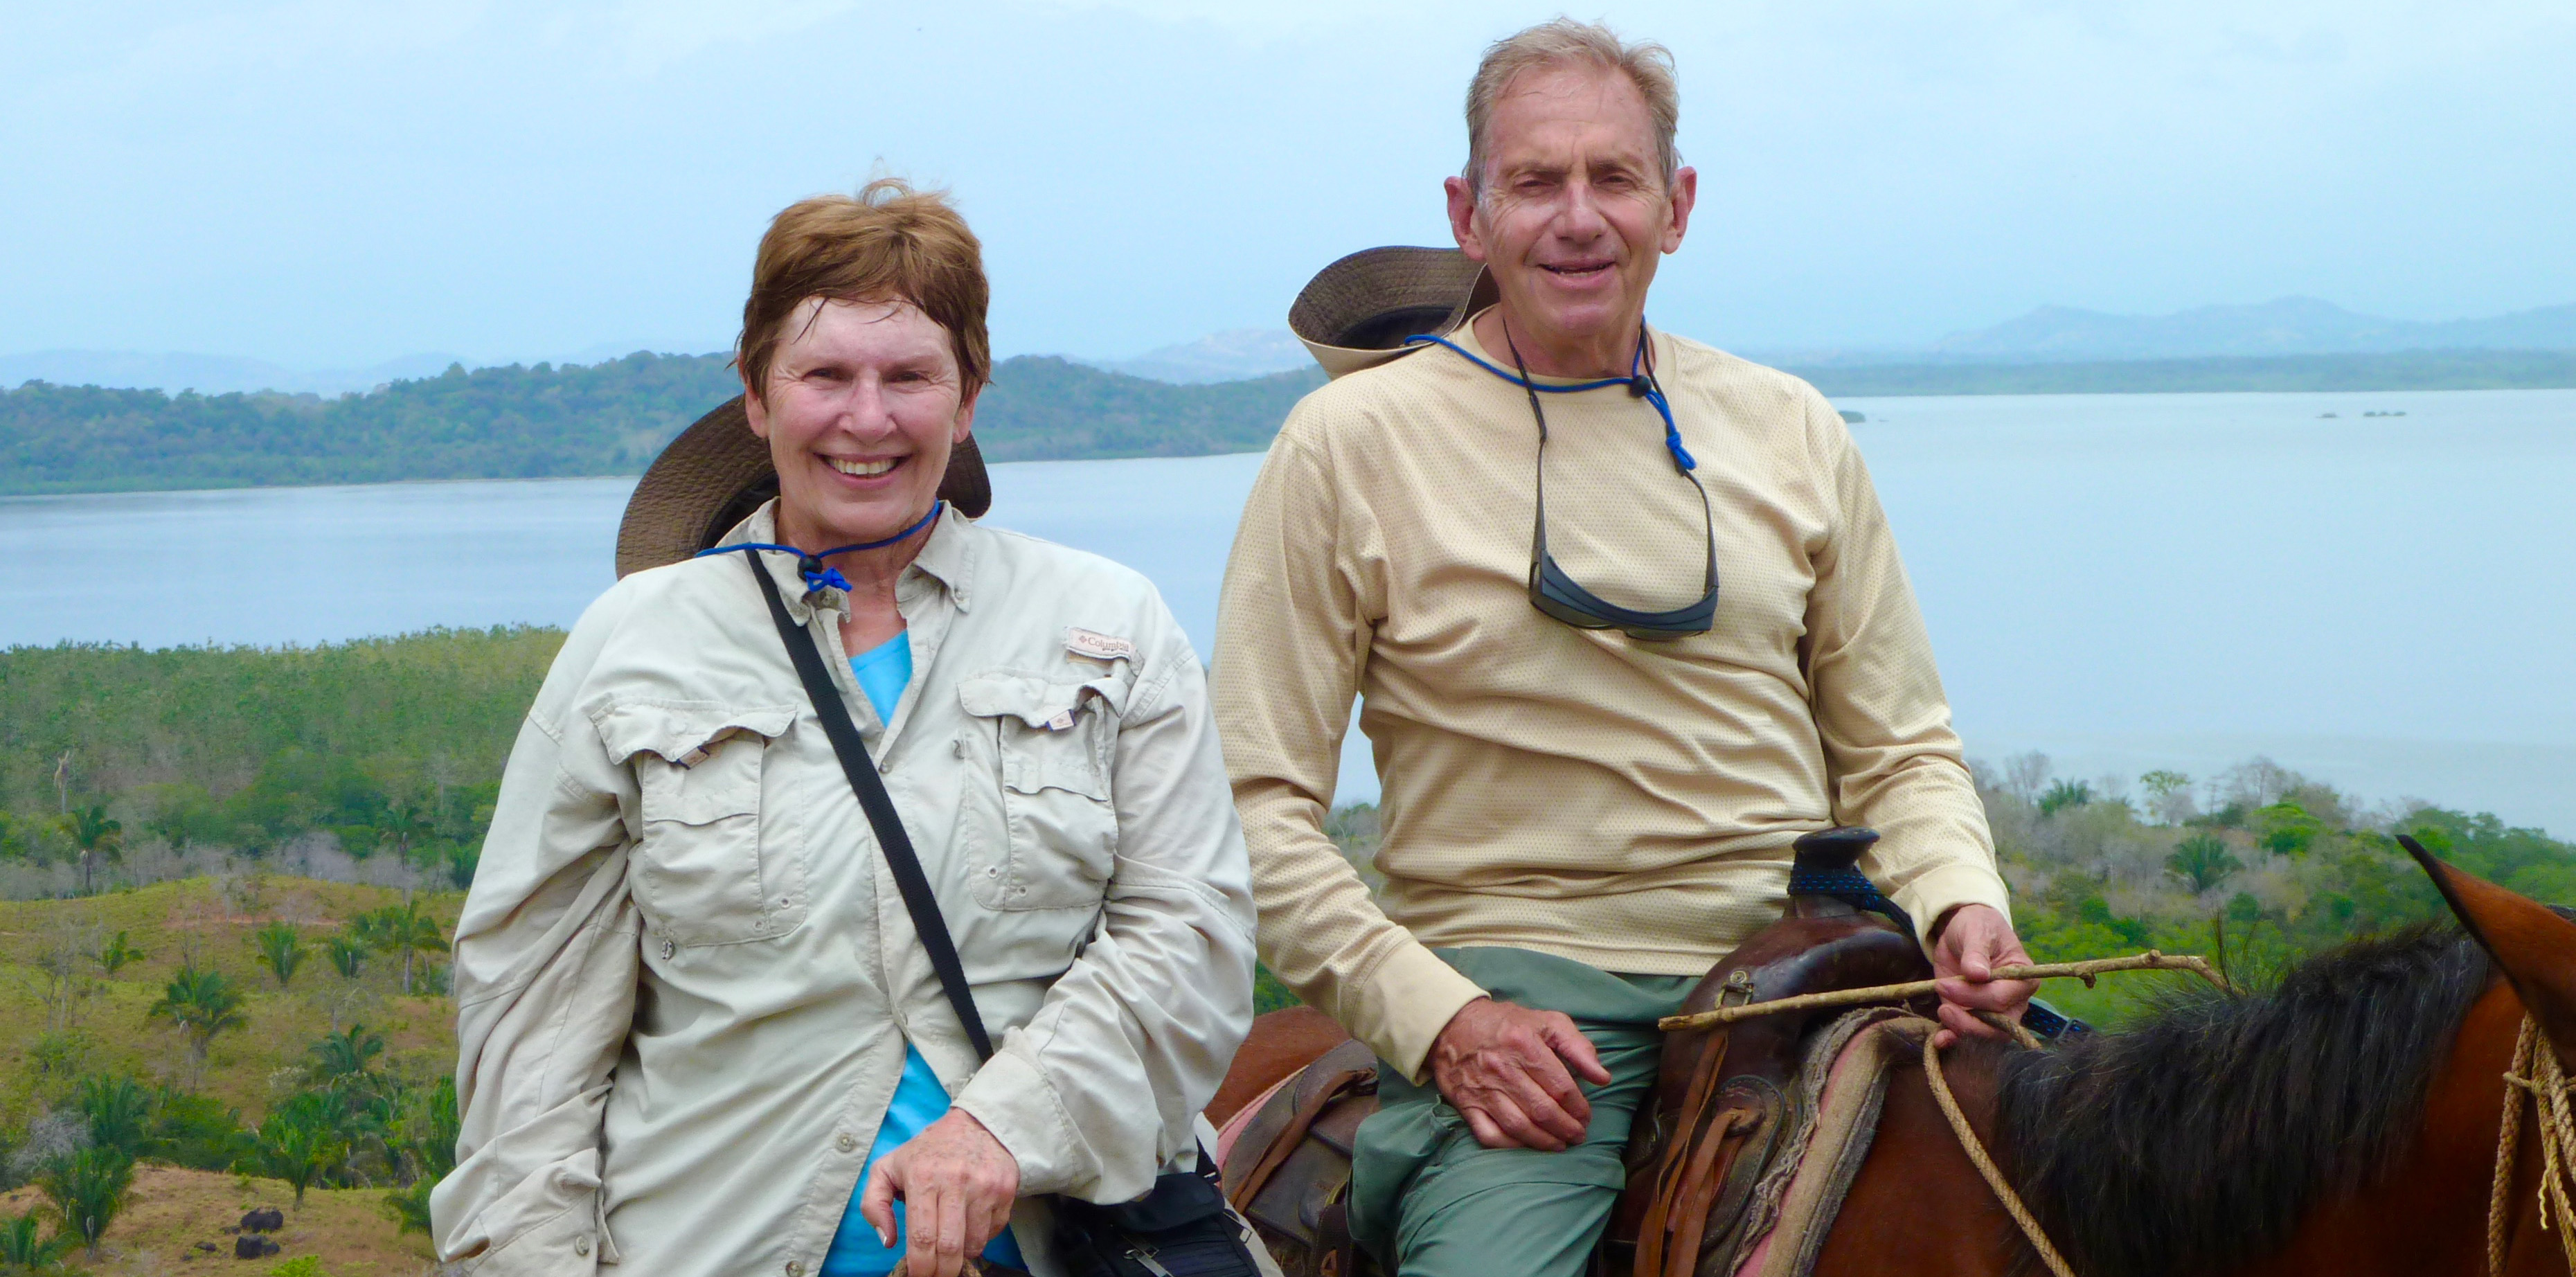 Lavaux and Diane ride on horseback in Panama.